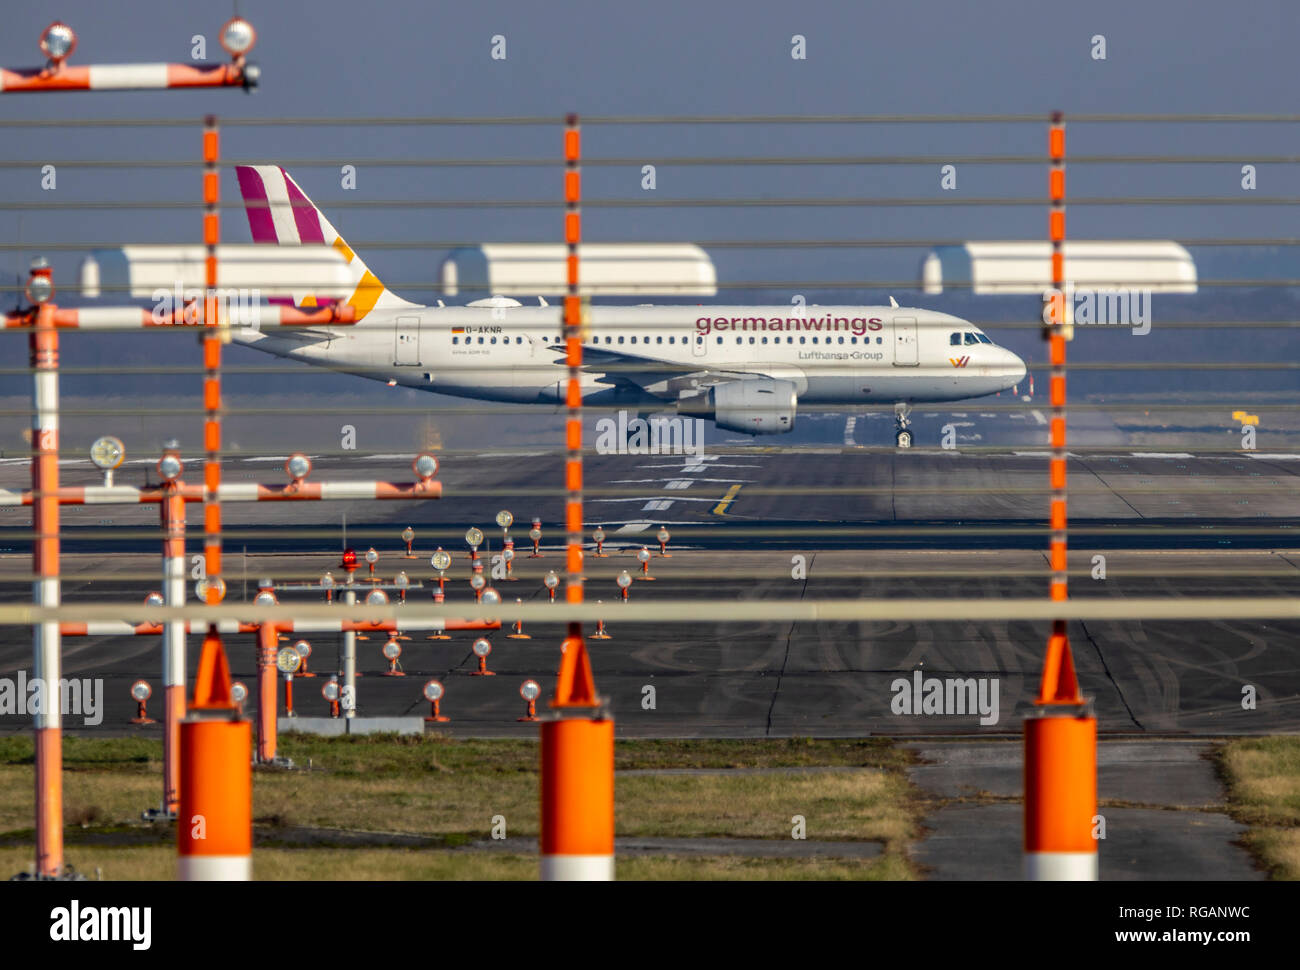 Airport Duesseldorf International, DUS, Germany, Germanwings, Airbus A319, on taxiway, Stock Photo